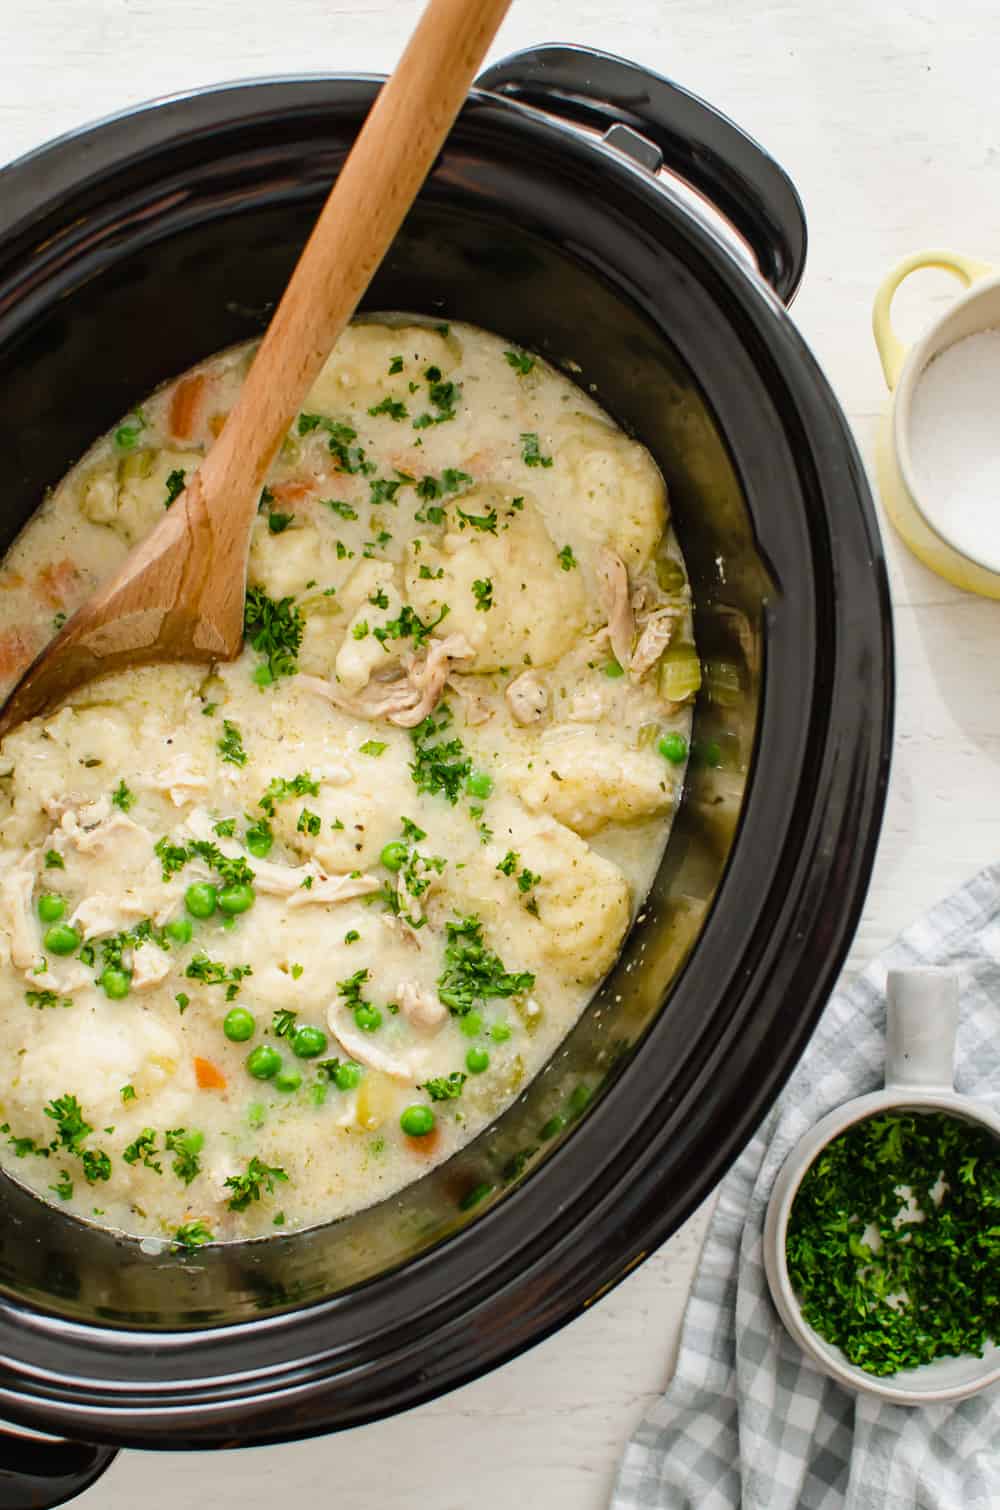 Crock pot chicken and dumplings ready to be served with chopped fresh parsley on top.